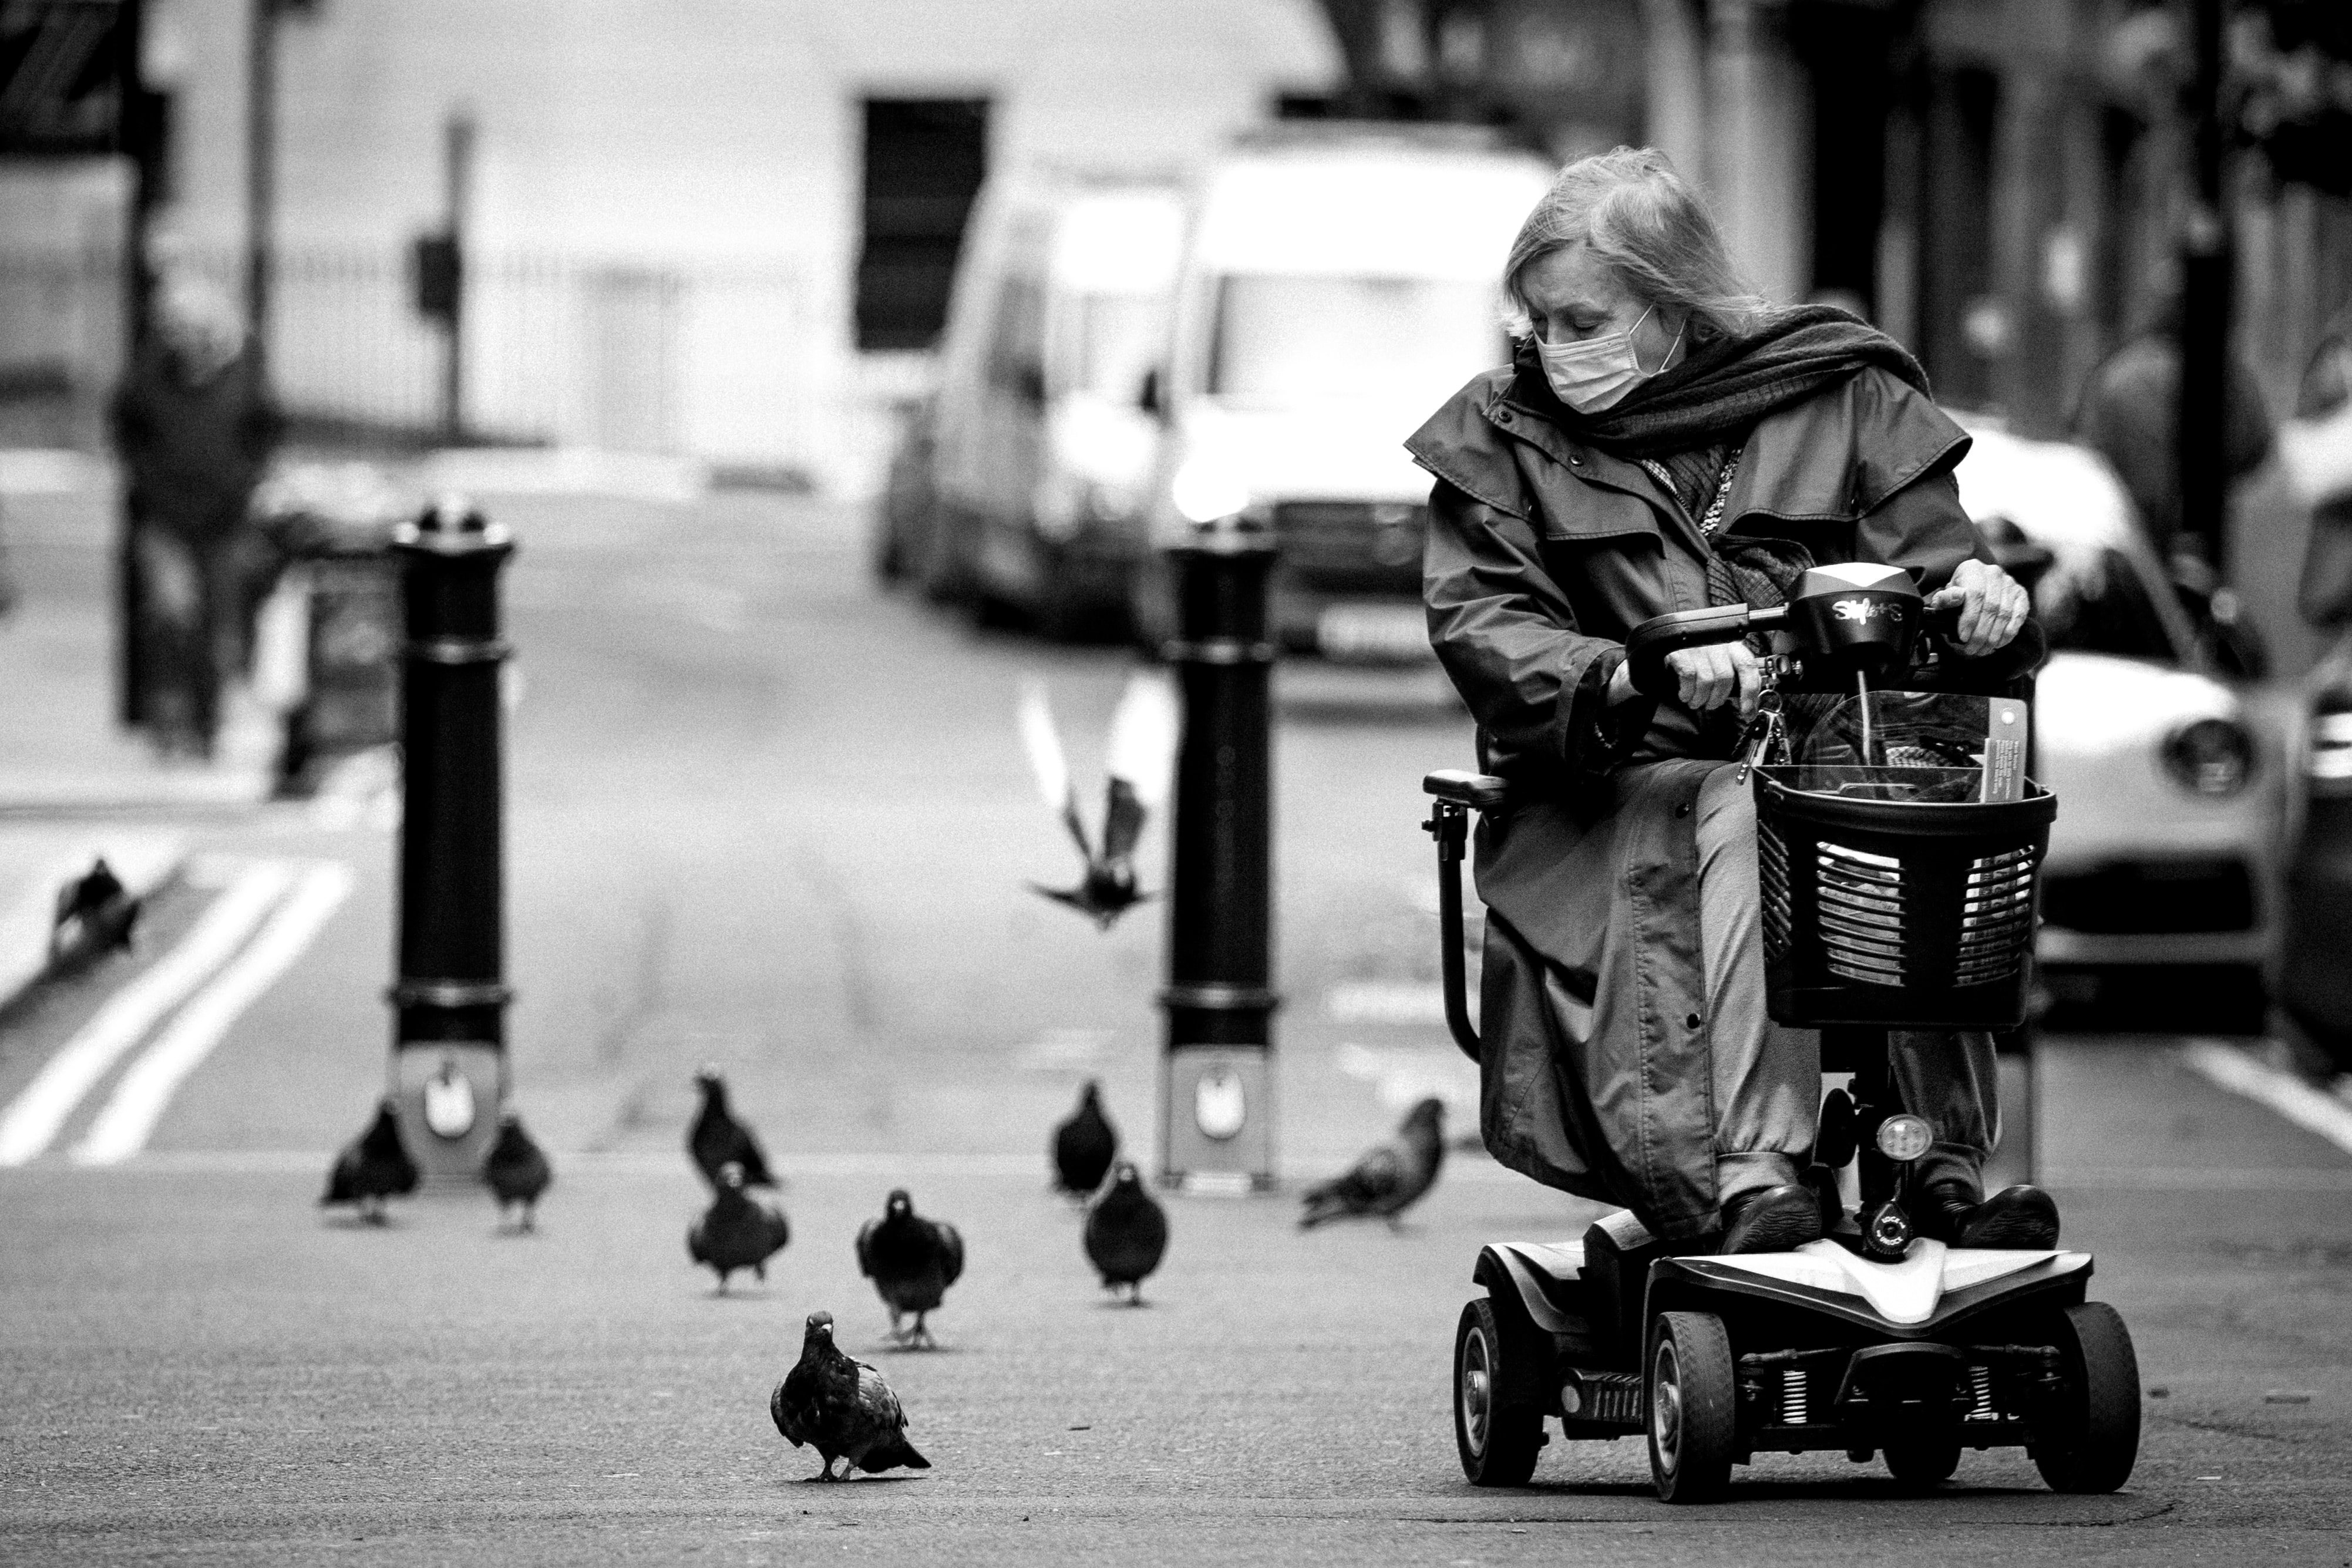 Black and white image of woman on mobility scooter looking a birds; image by Ben Wicks, via Unsplash.com.